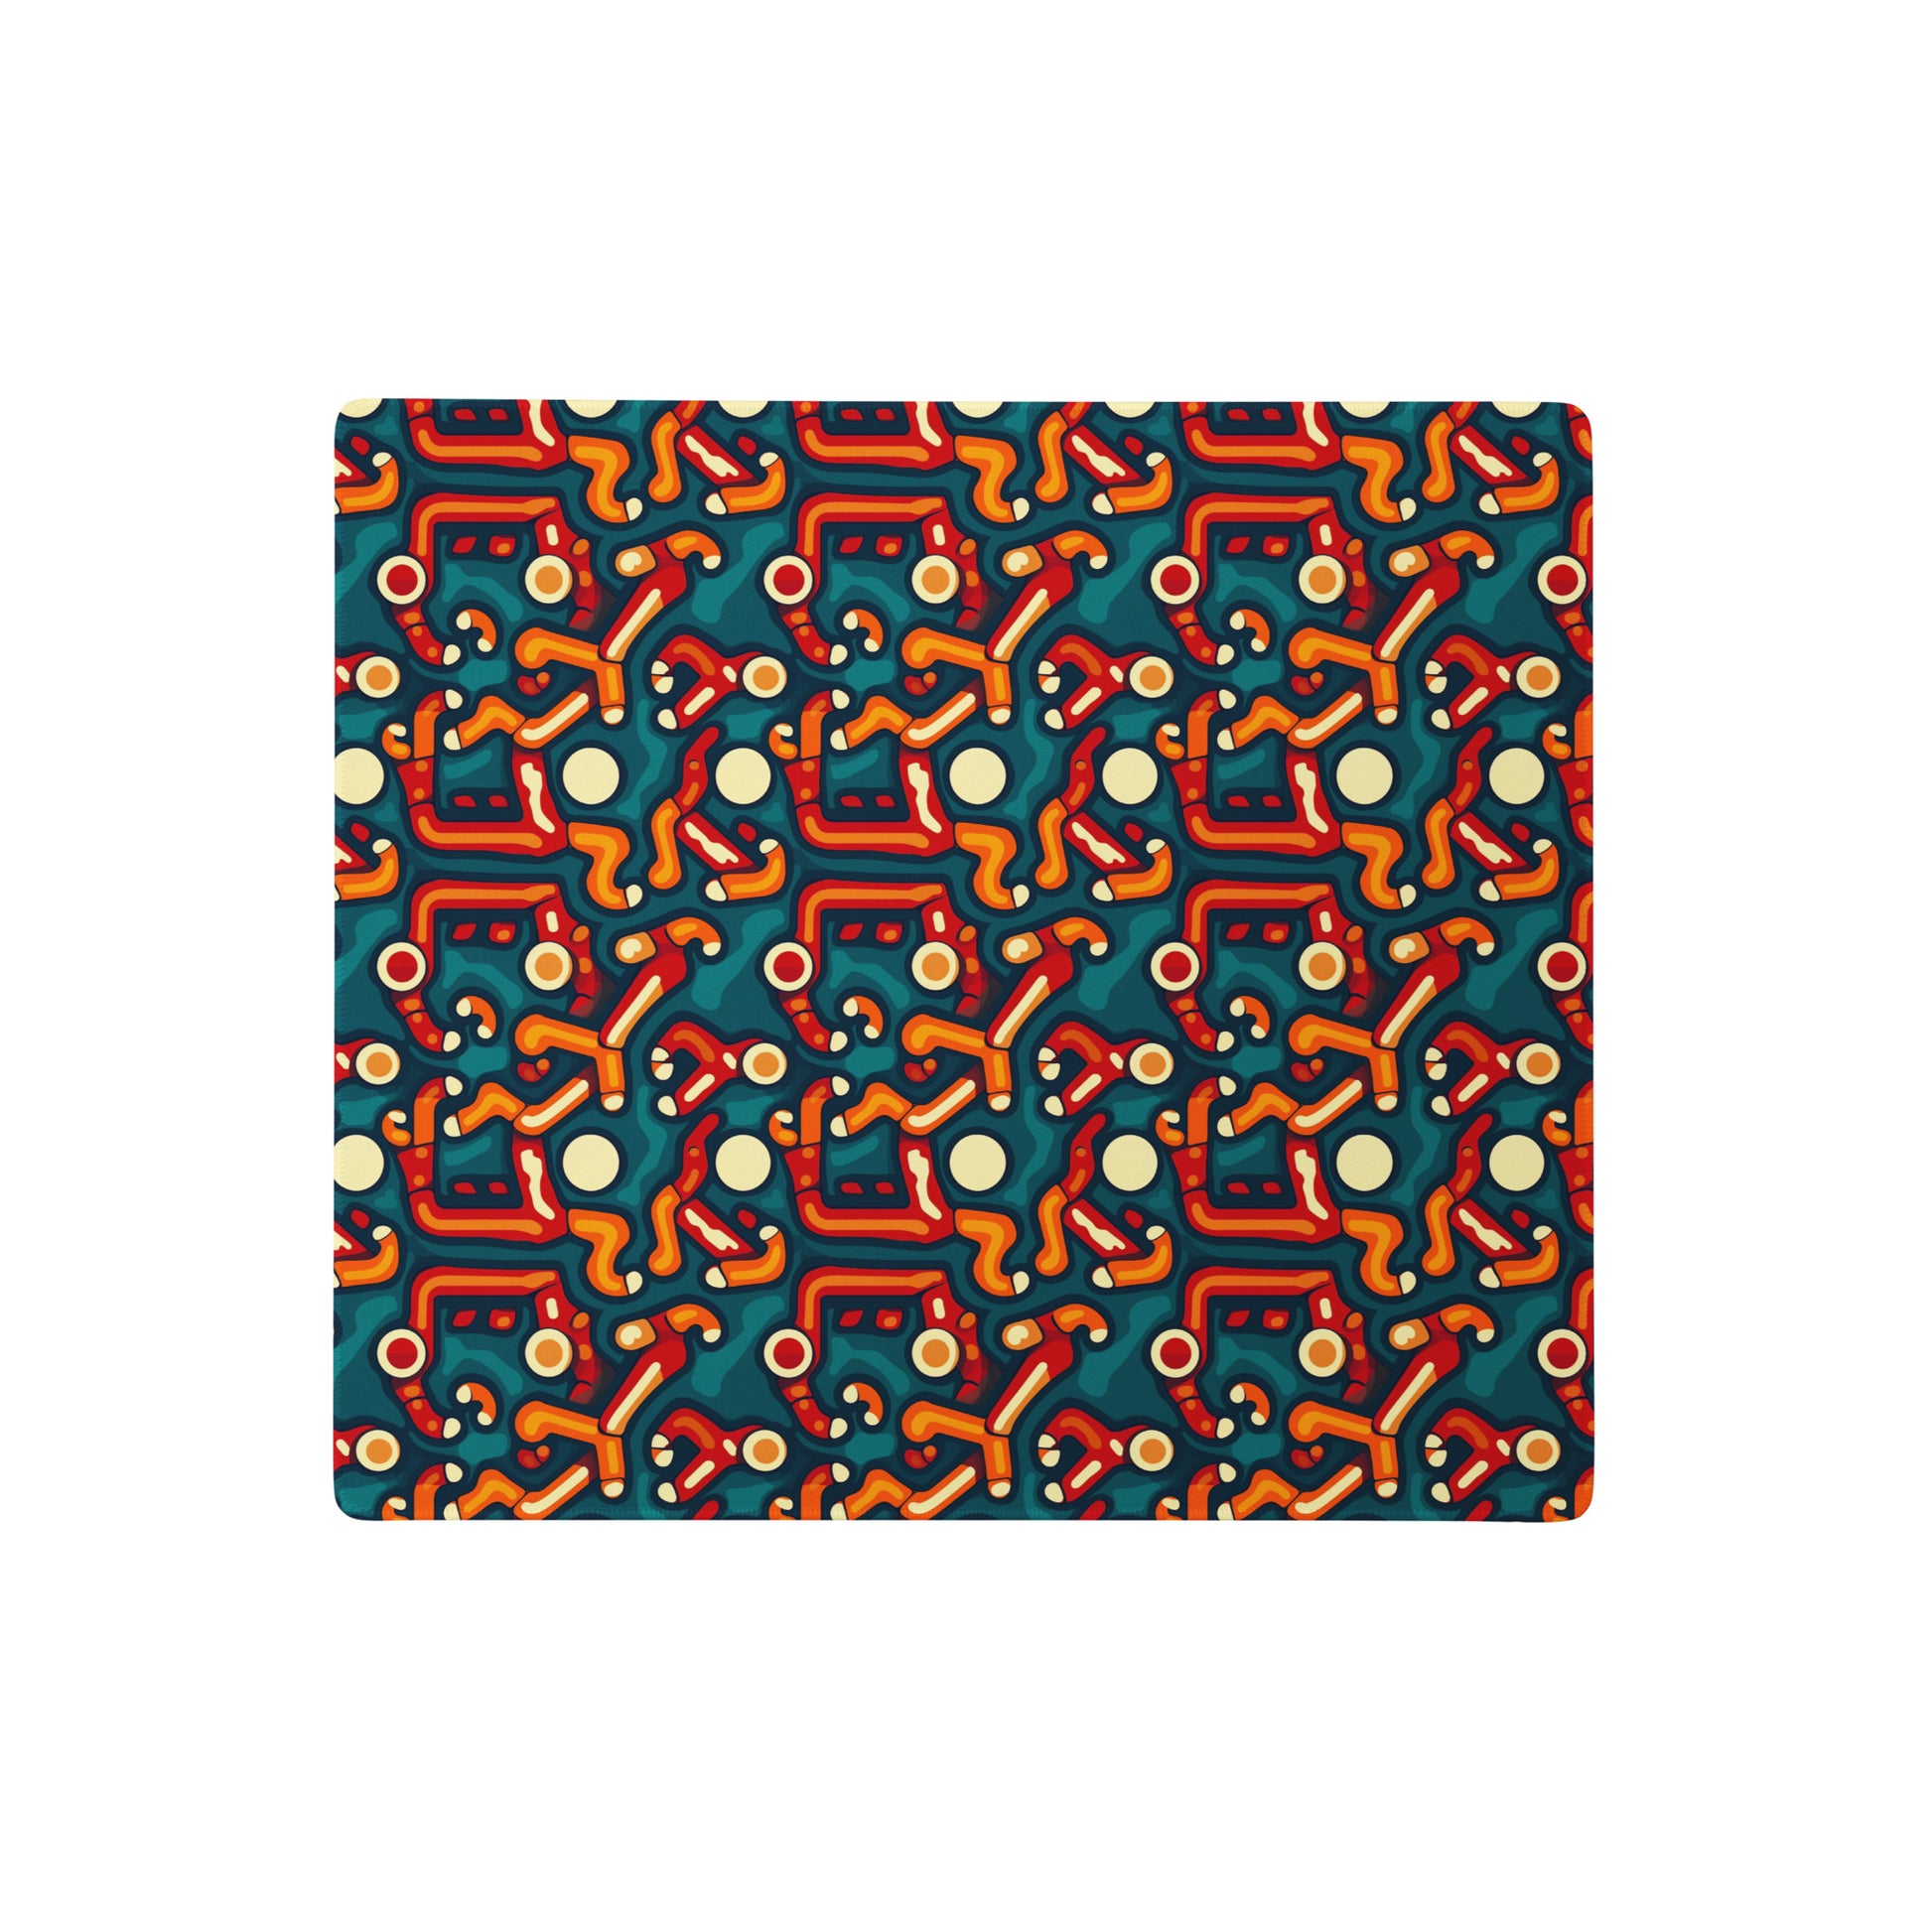 A 18" x 16" desk pad with abstract line art on it. Red, Orange and Teal in color.